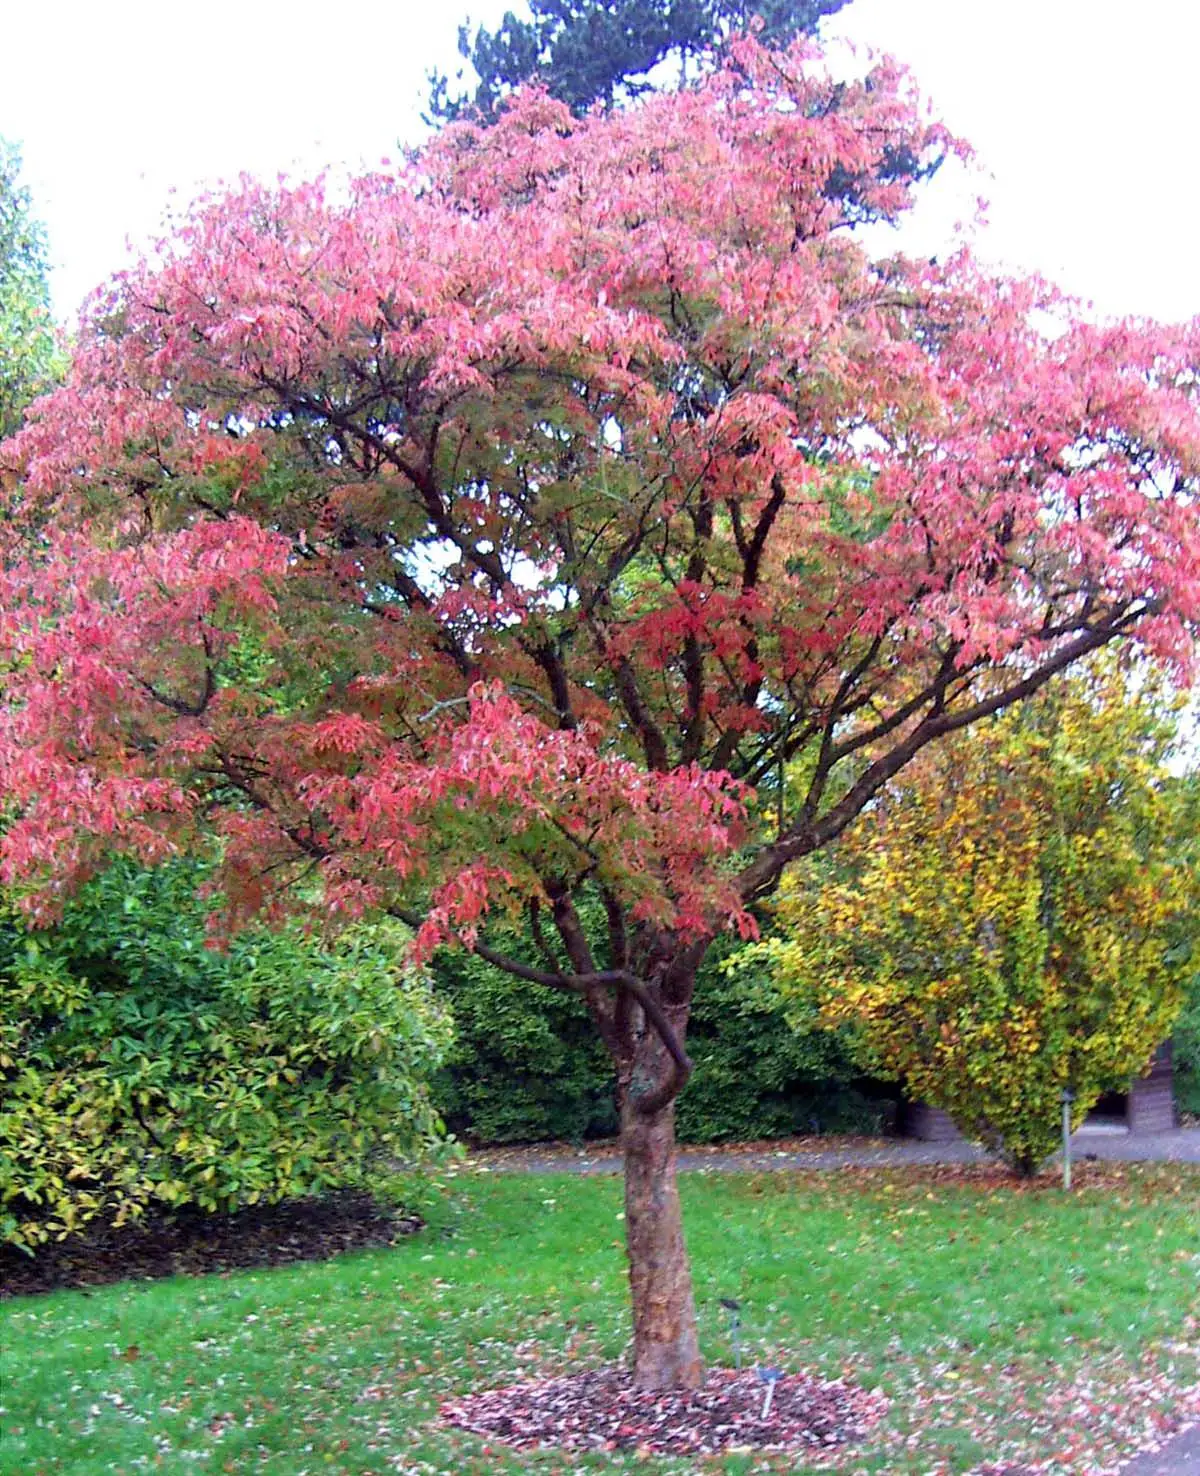 Acer griseum: characteristics, uses and care